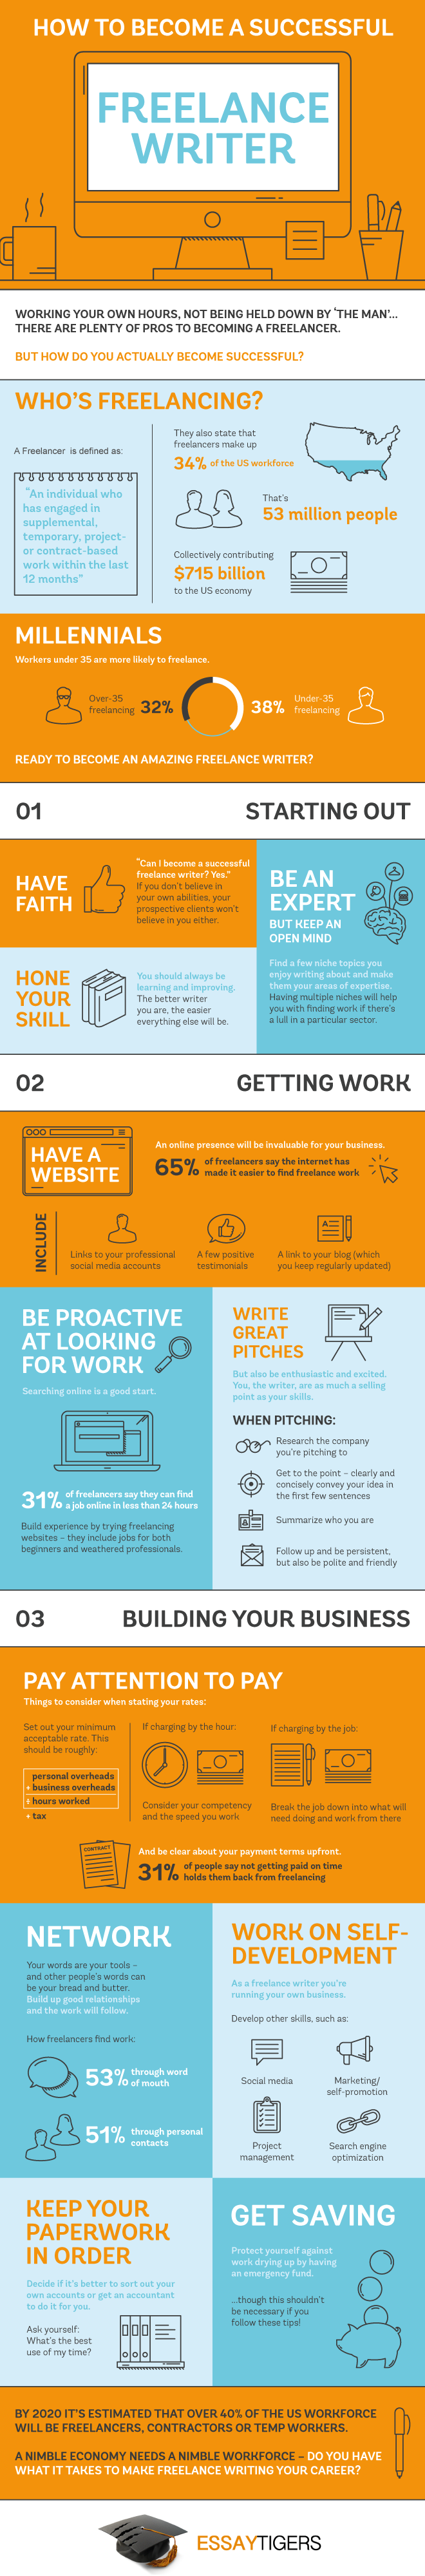 How to become a successful Freelance Writer Infographic